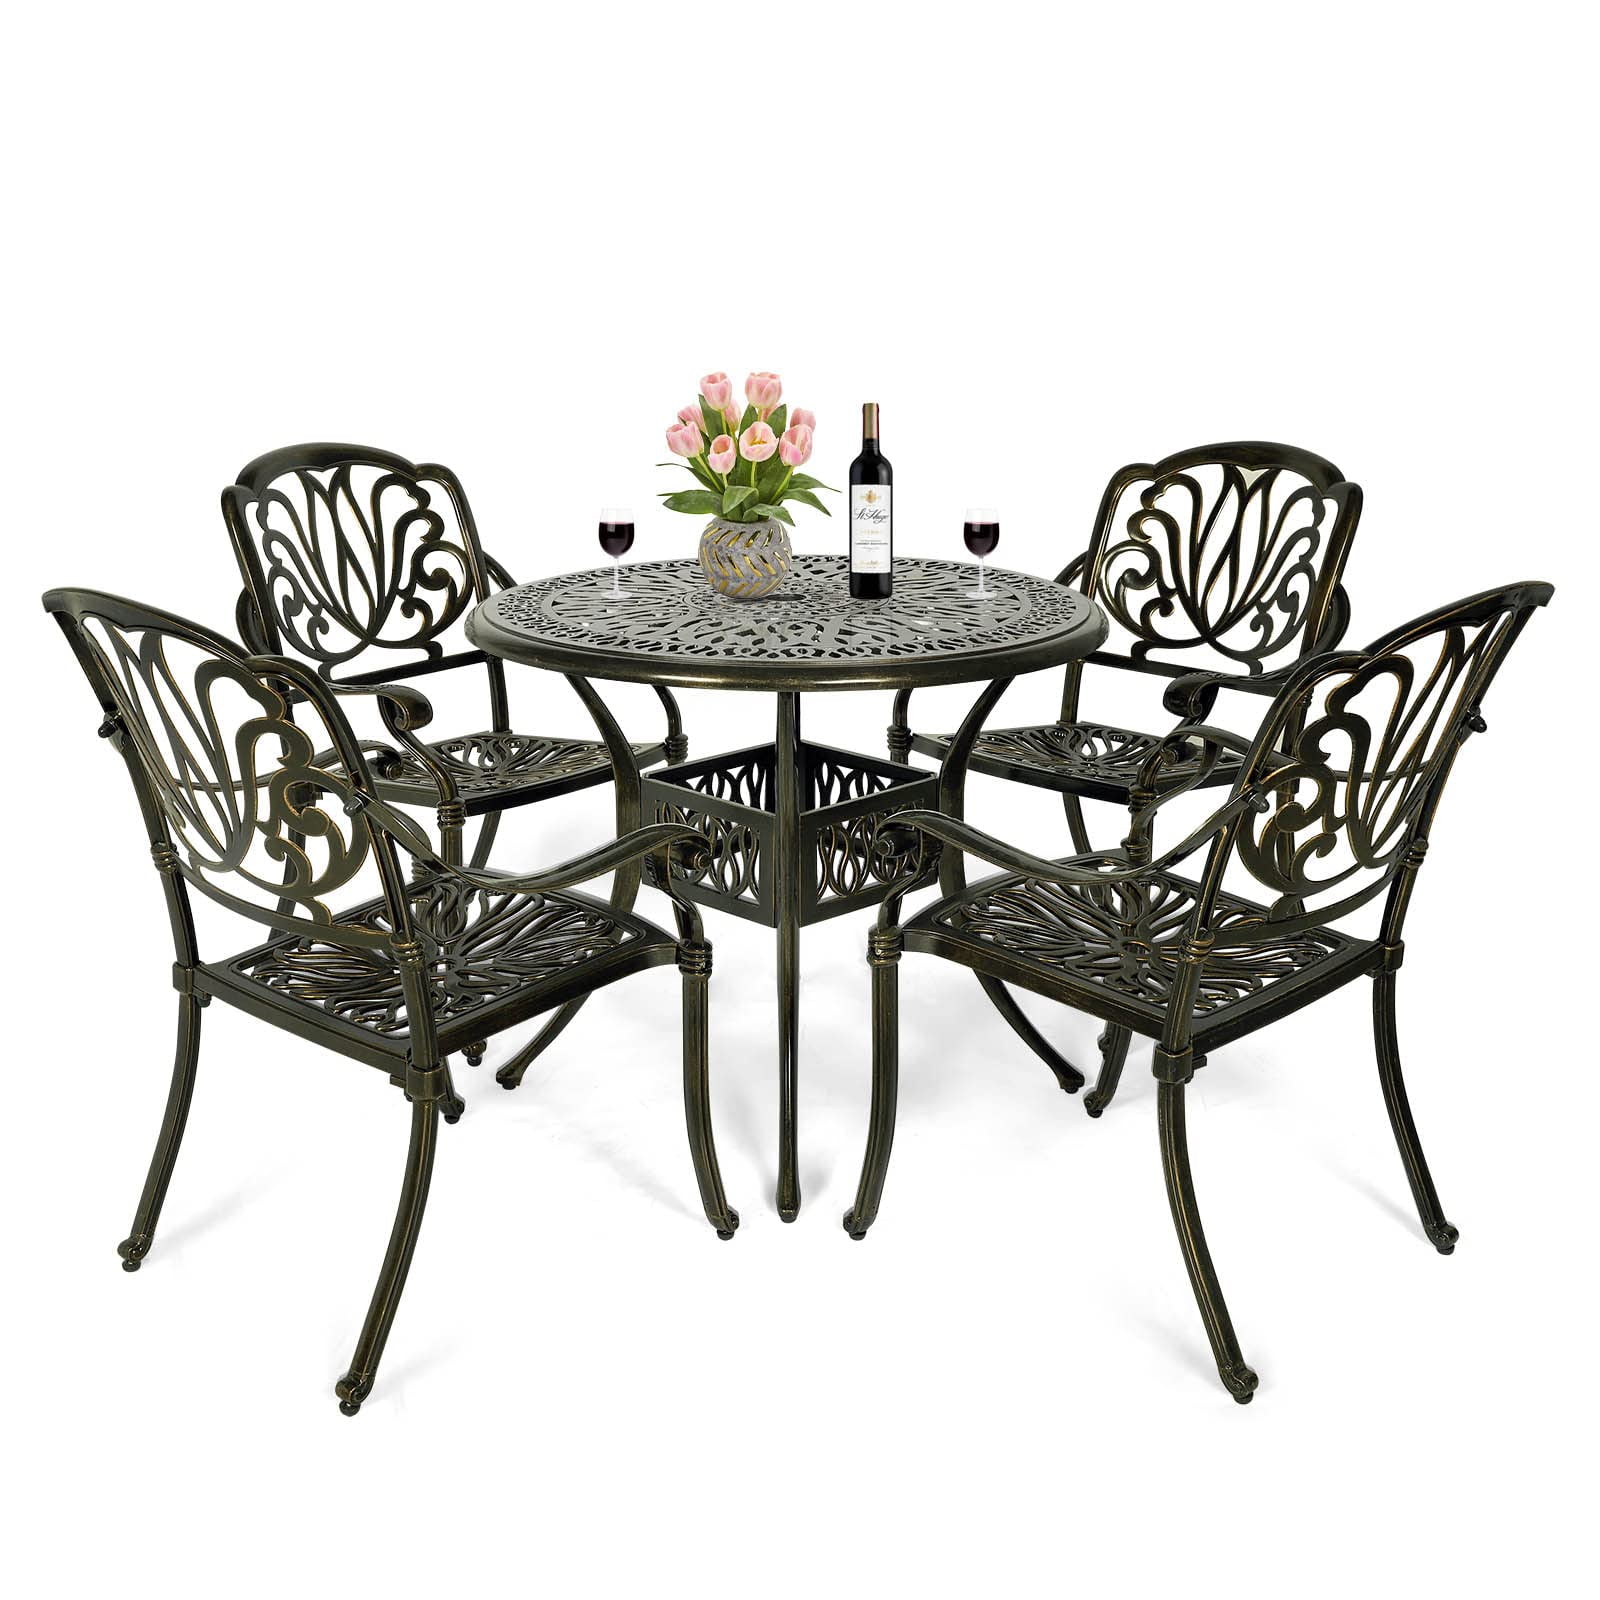 Black Round Cast Aluminum Dining Table for Backyard 36 Diameter and 30 Height Garden or Porch Giantex Patio Table with Umbrella Hole Outdoor Bistro Table 